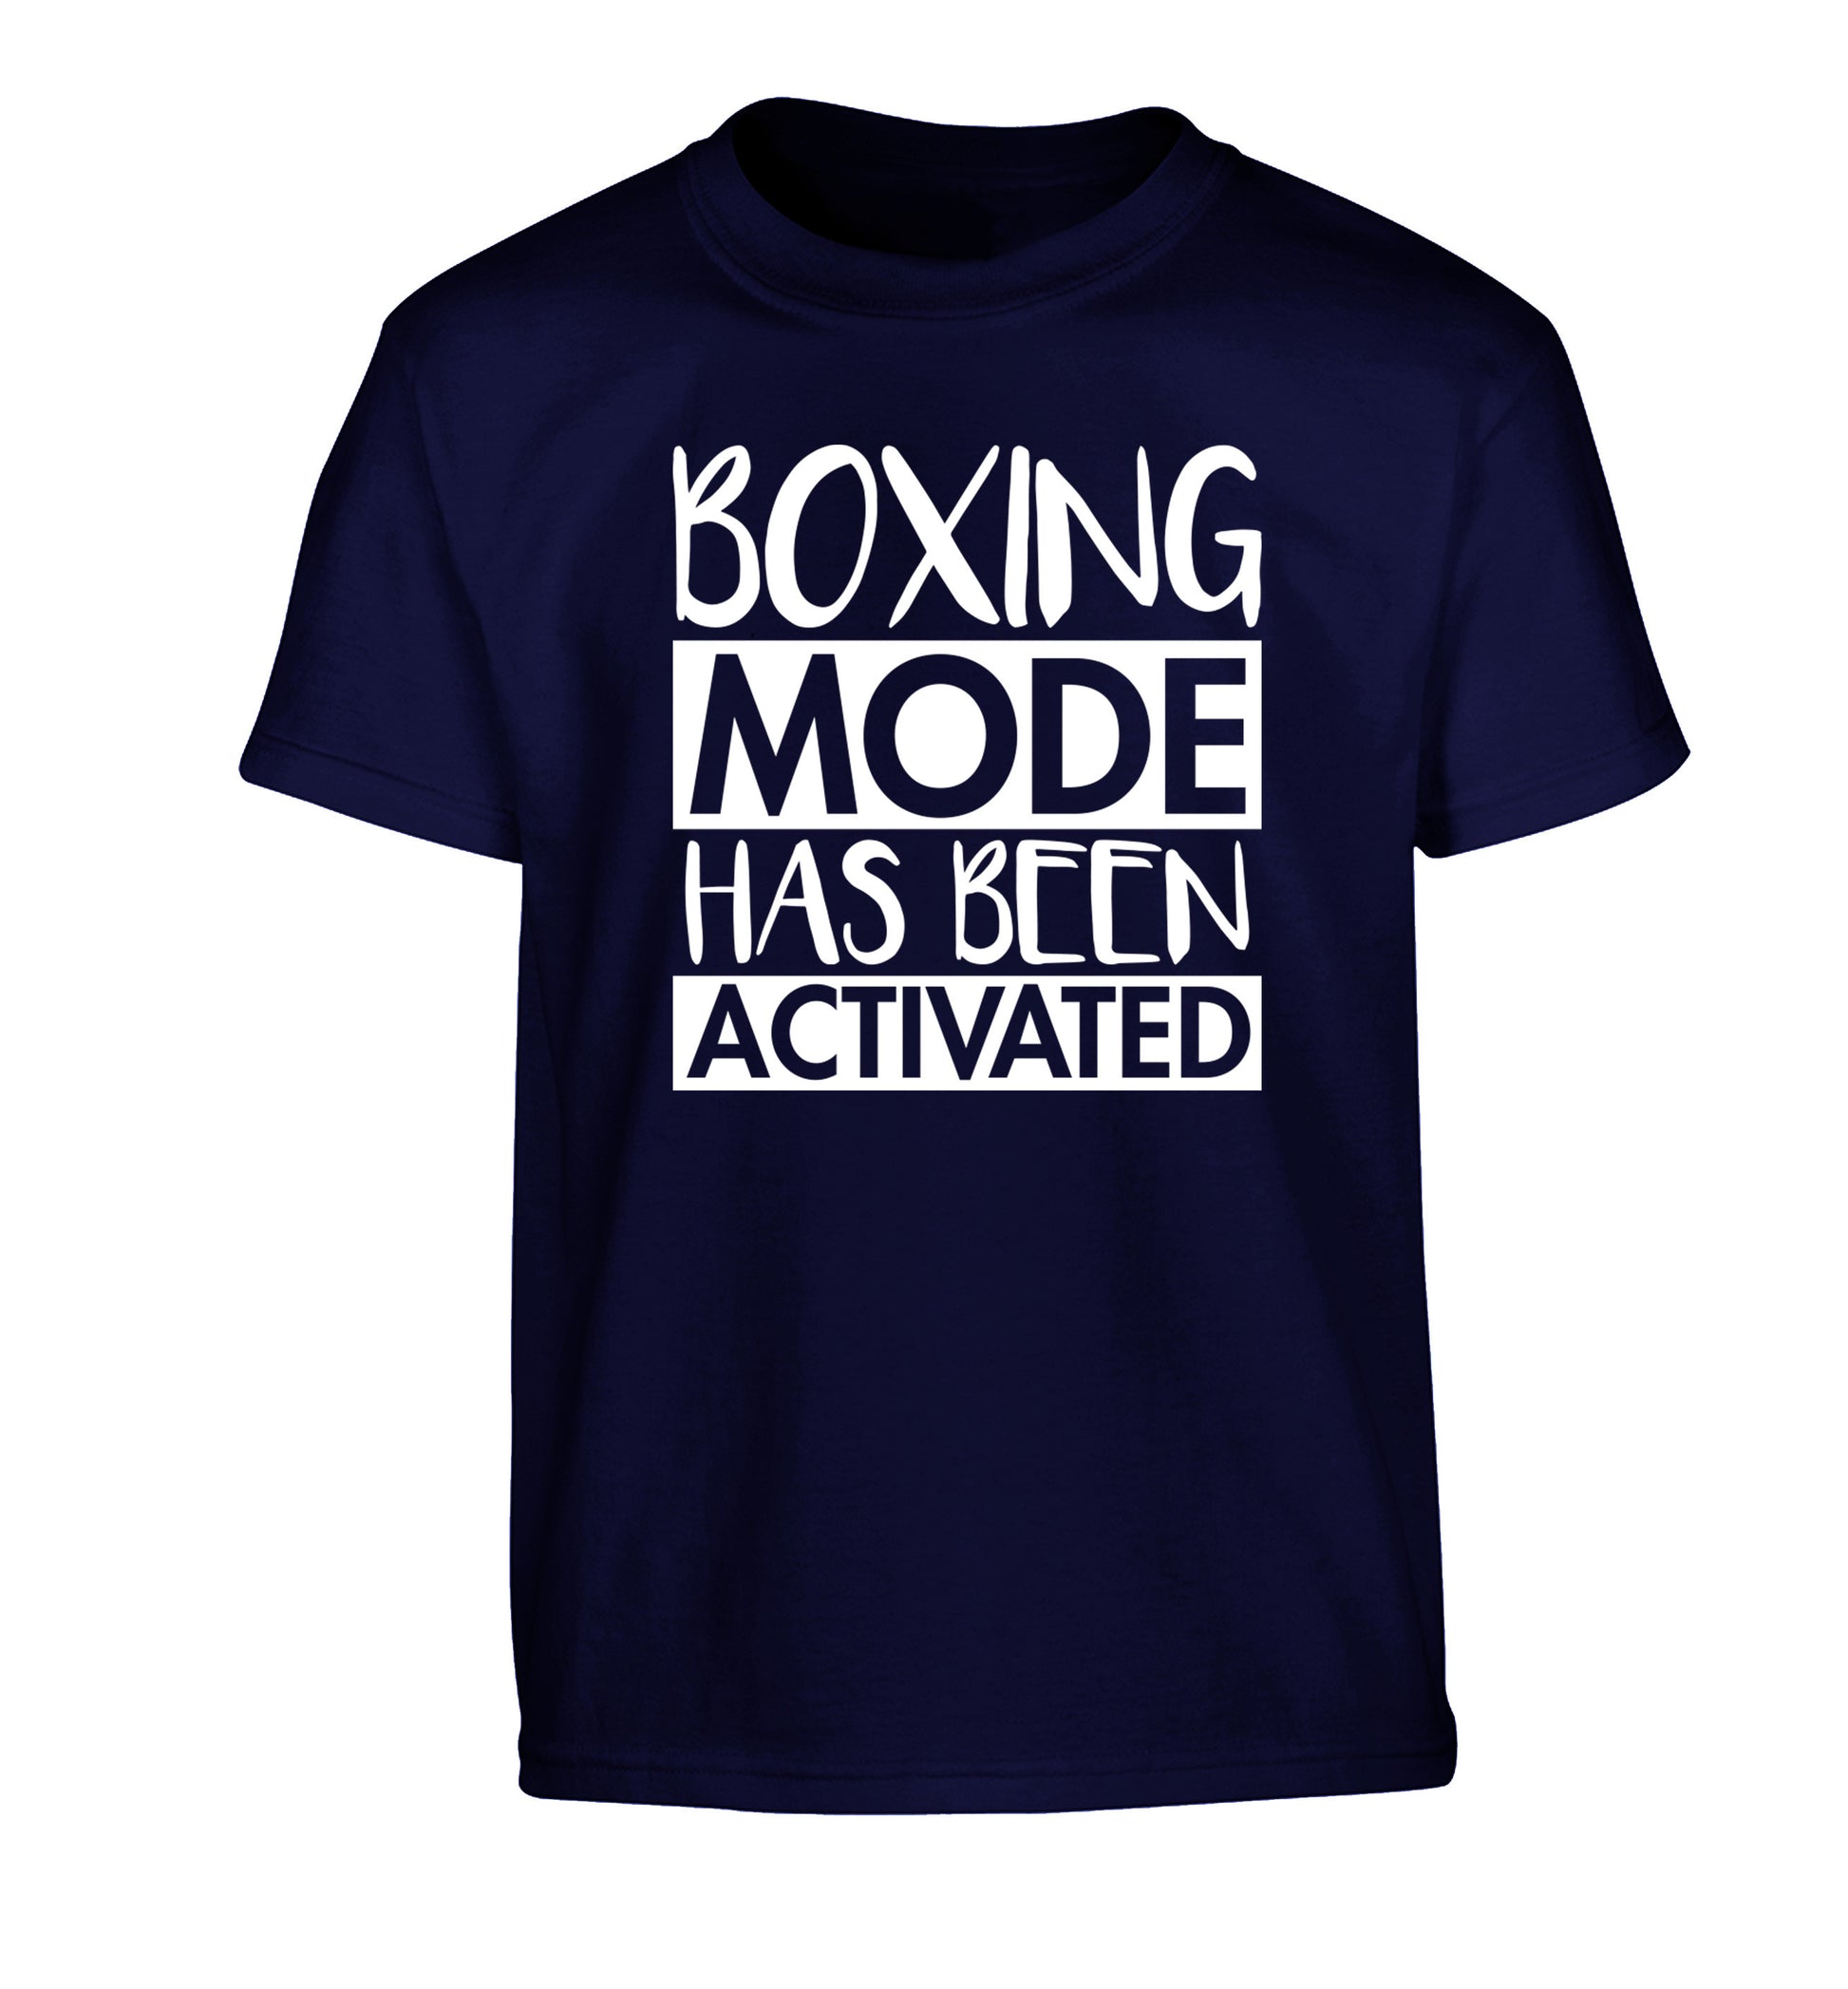 Boxing mode activated Children's navy Tshirt 12-14 Years